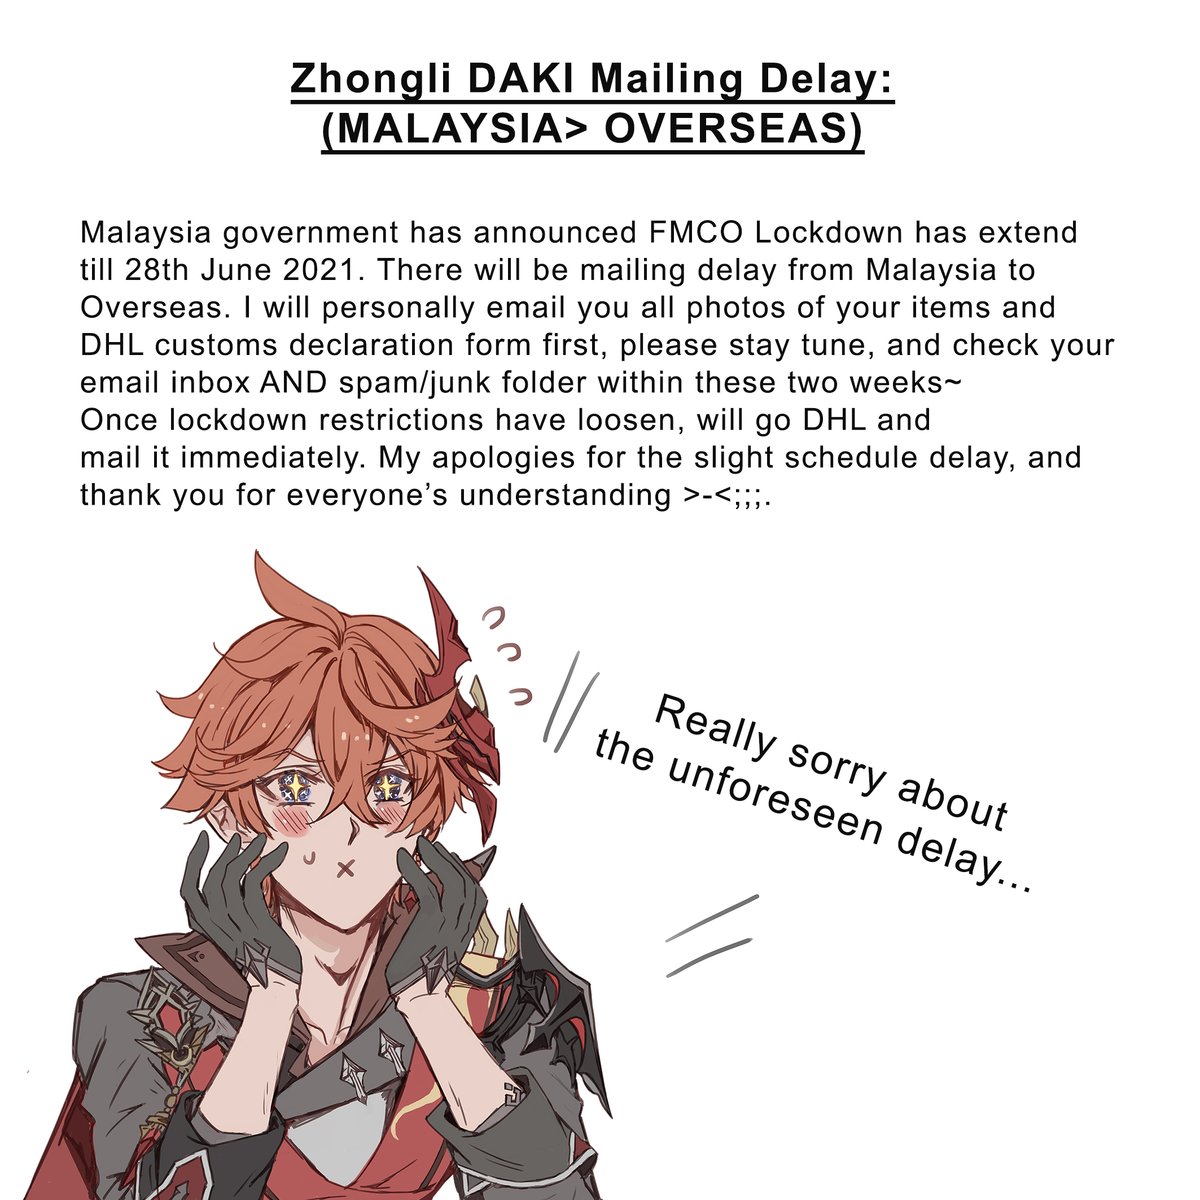 Hi everyone who preordered the ZL daki, Malaysia's Full Lockdown has extended till 28th June, so there will be a slight schedule delay in mailing. My sincerest apologies about that, and thank you for everyone's understanding >-< ;;;! 